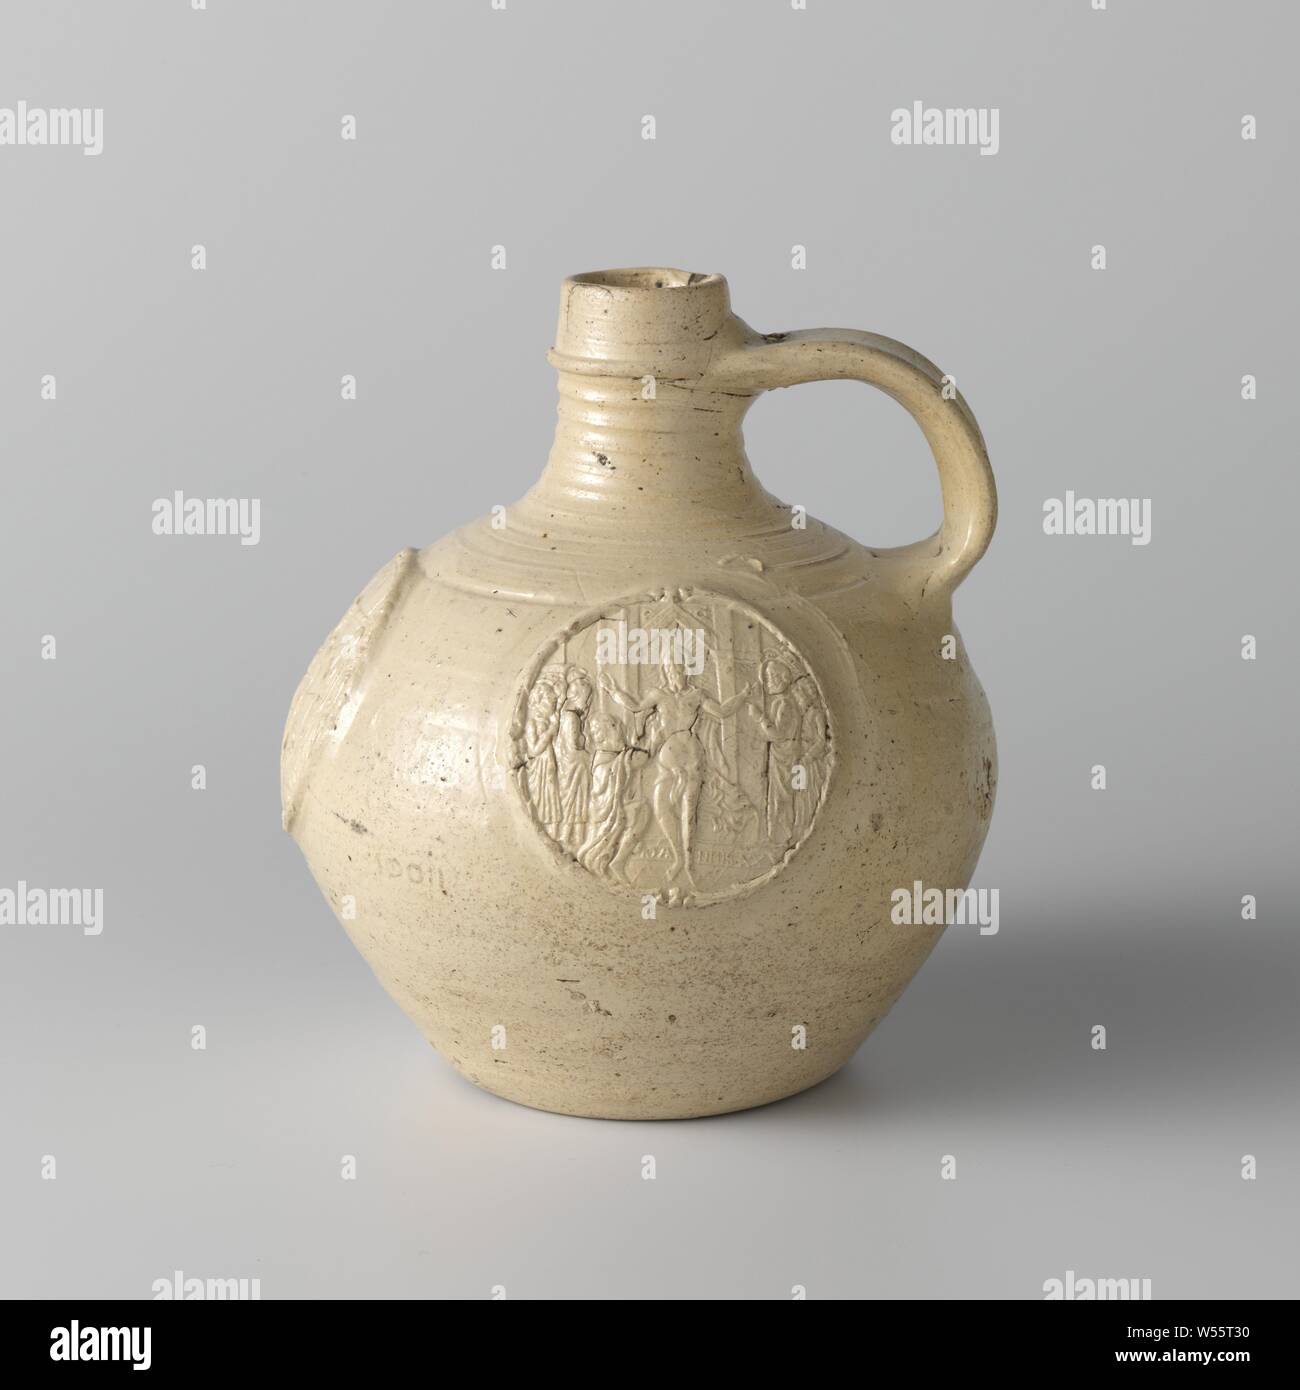 Jug with Christ and doubting Thomas, Stoneware jug on stand with a spherical body and narrow neck. The C-shaped ear is attached to the neck and shoulder. Profile and turning rings on the neck. The belly with three printed and imposed medallions with Christ and the unbeliever Thomas in relief. On the bottom of the medallion the inscription 'IOHANNIS XX'. Siegburg., anonymous, Siegburg, c. 1550 - c. 1599, stoneware, glaze, vitrification, h 16.3 cm d 3.2 cm d 14.5 cm d 7.9 cm Stock Photo